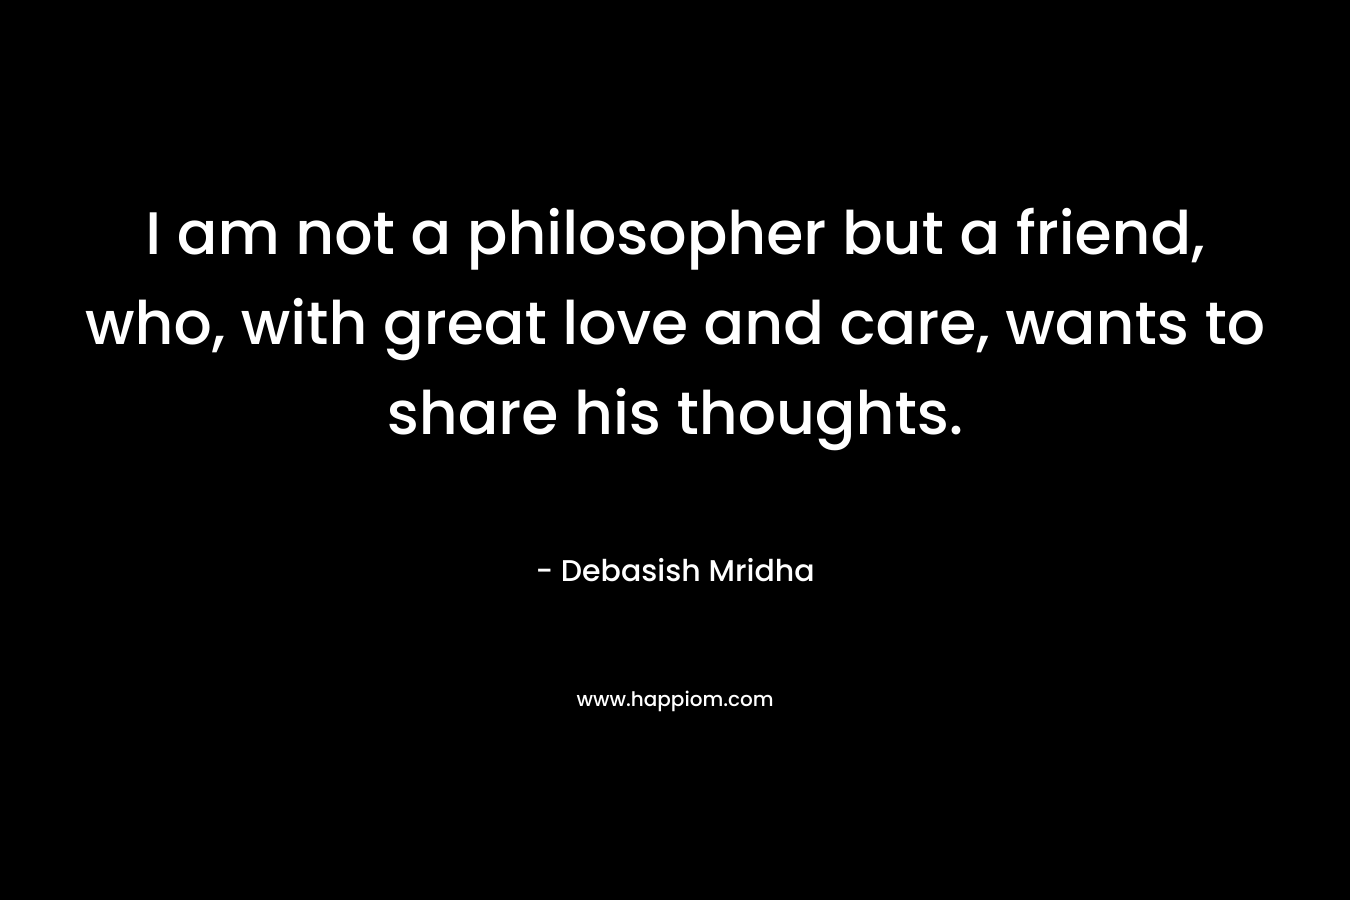 I am not a philosopher but a friend, who, with great love and care, wants to share his thoughts. – Debasish Mridha